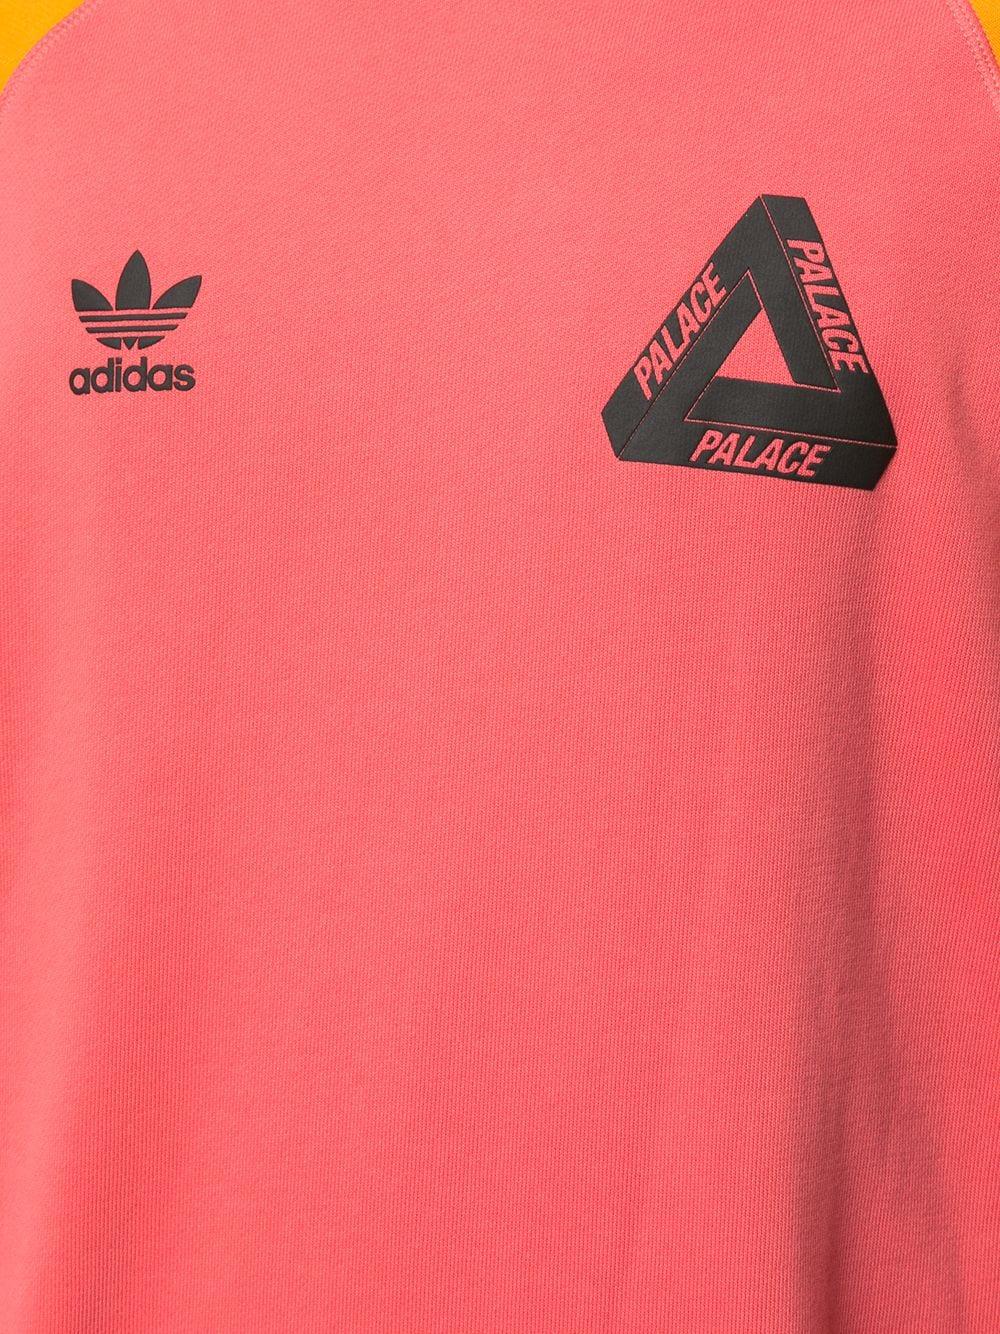 Palace Cotton X Adidas Crew Neck Sweatshirt in Pink for Men - Lyst